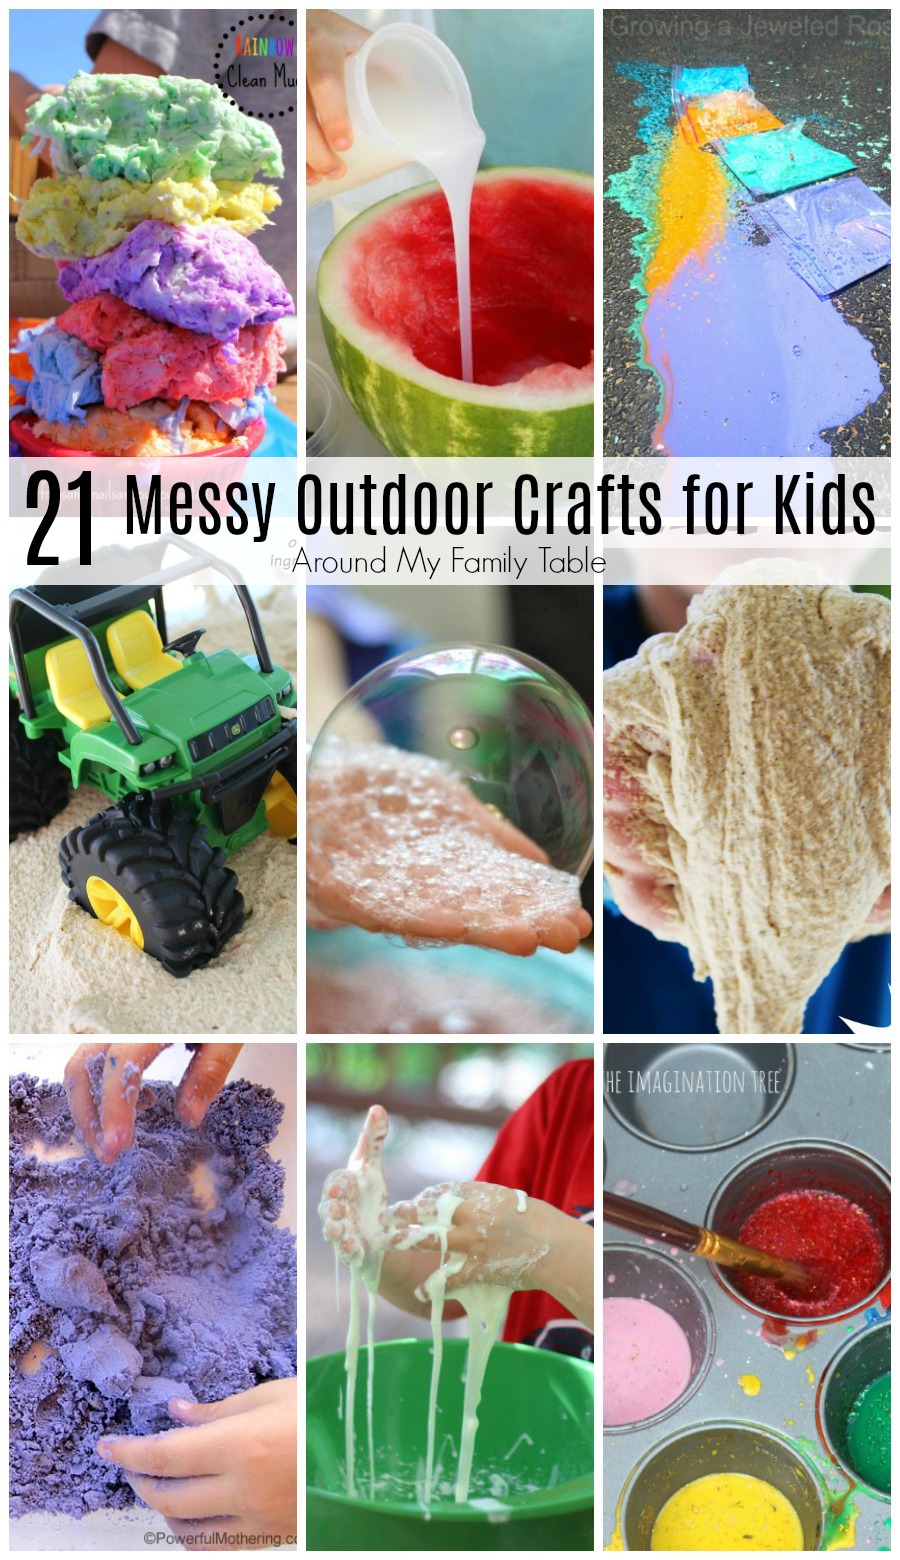 21 Messy Outdoor Crafts for - My Family Table